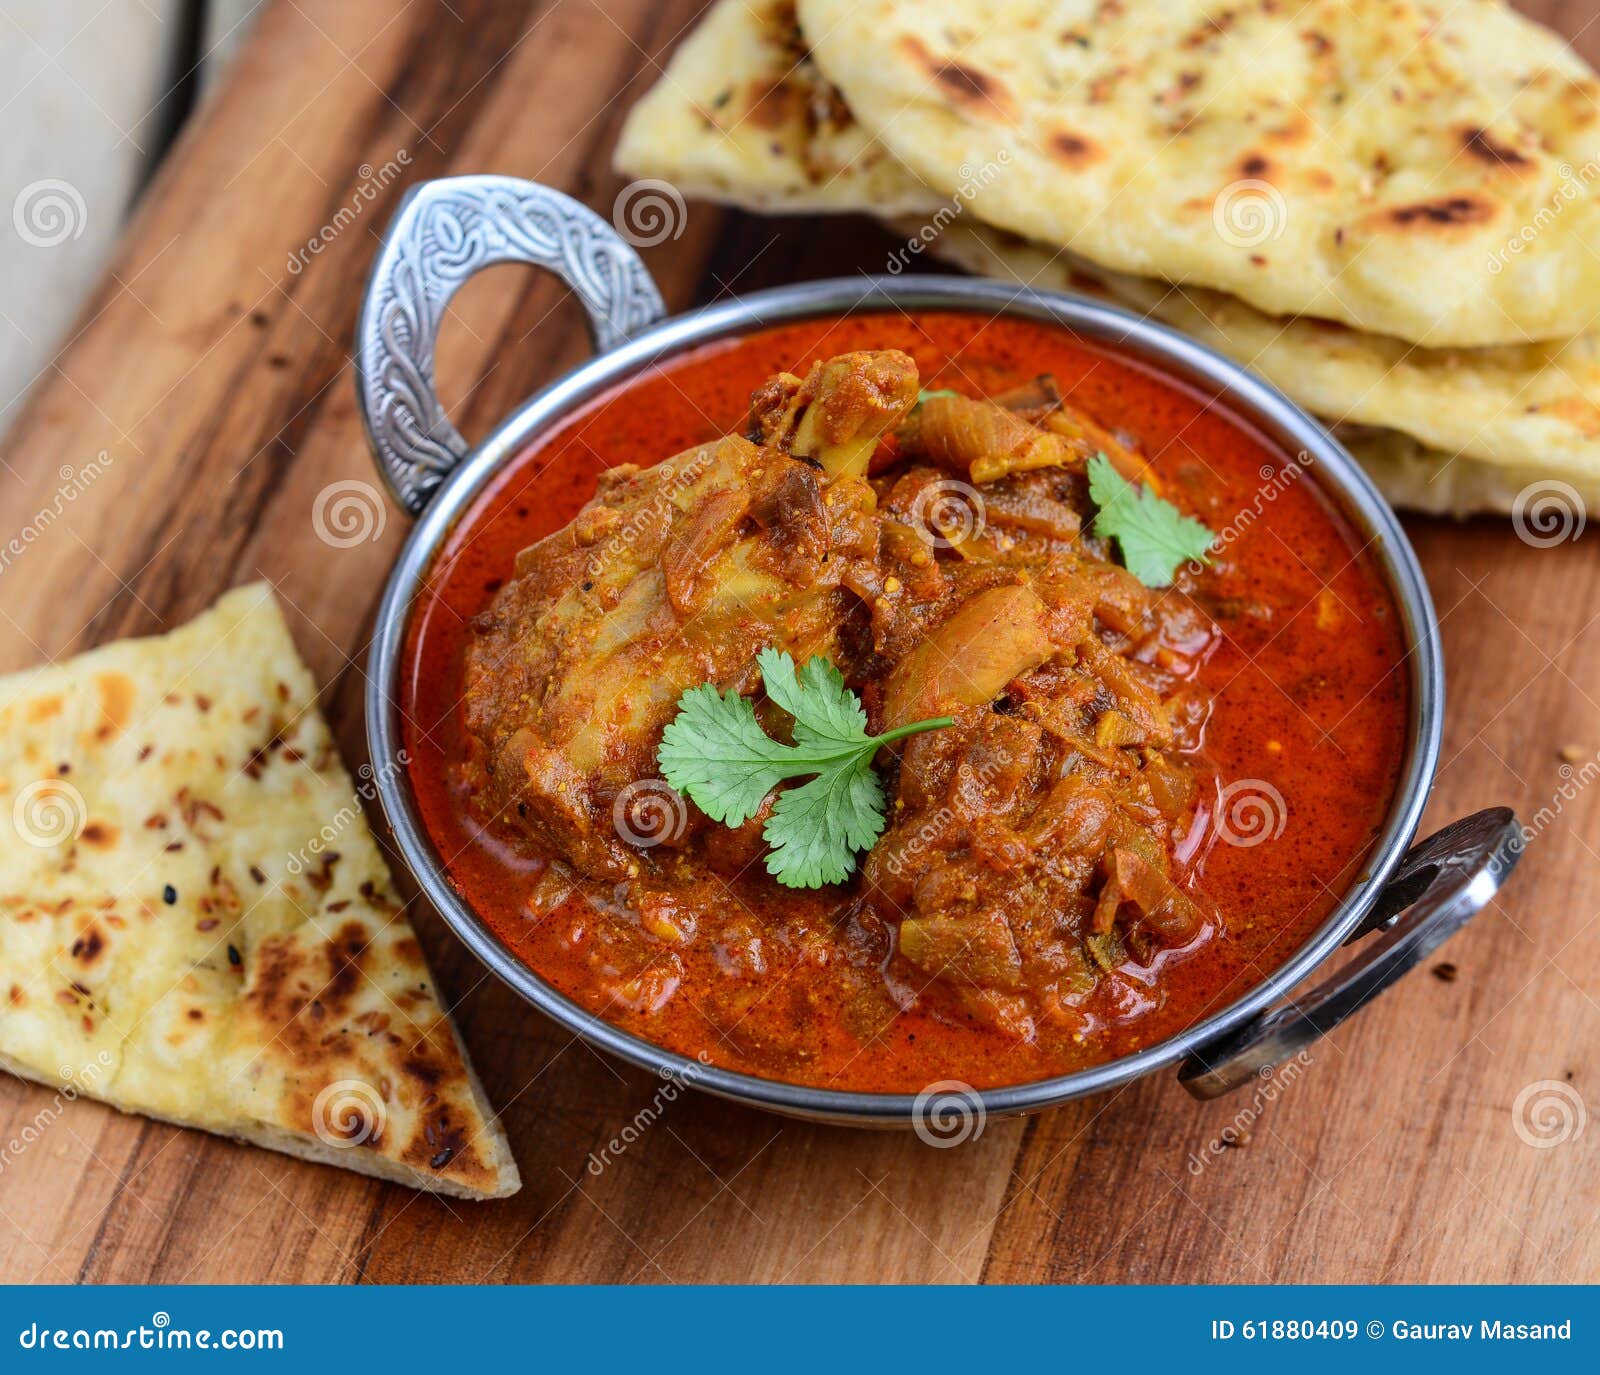 chicken curry with naan